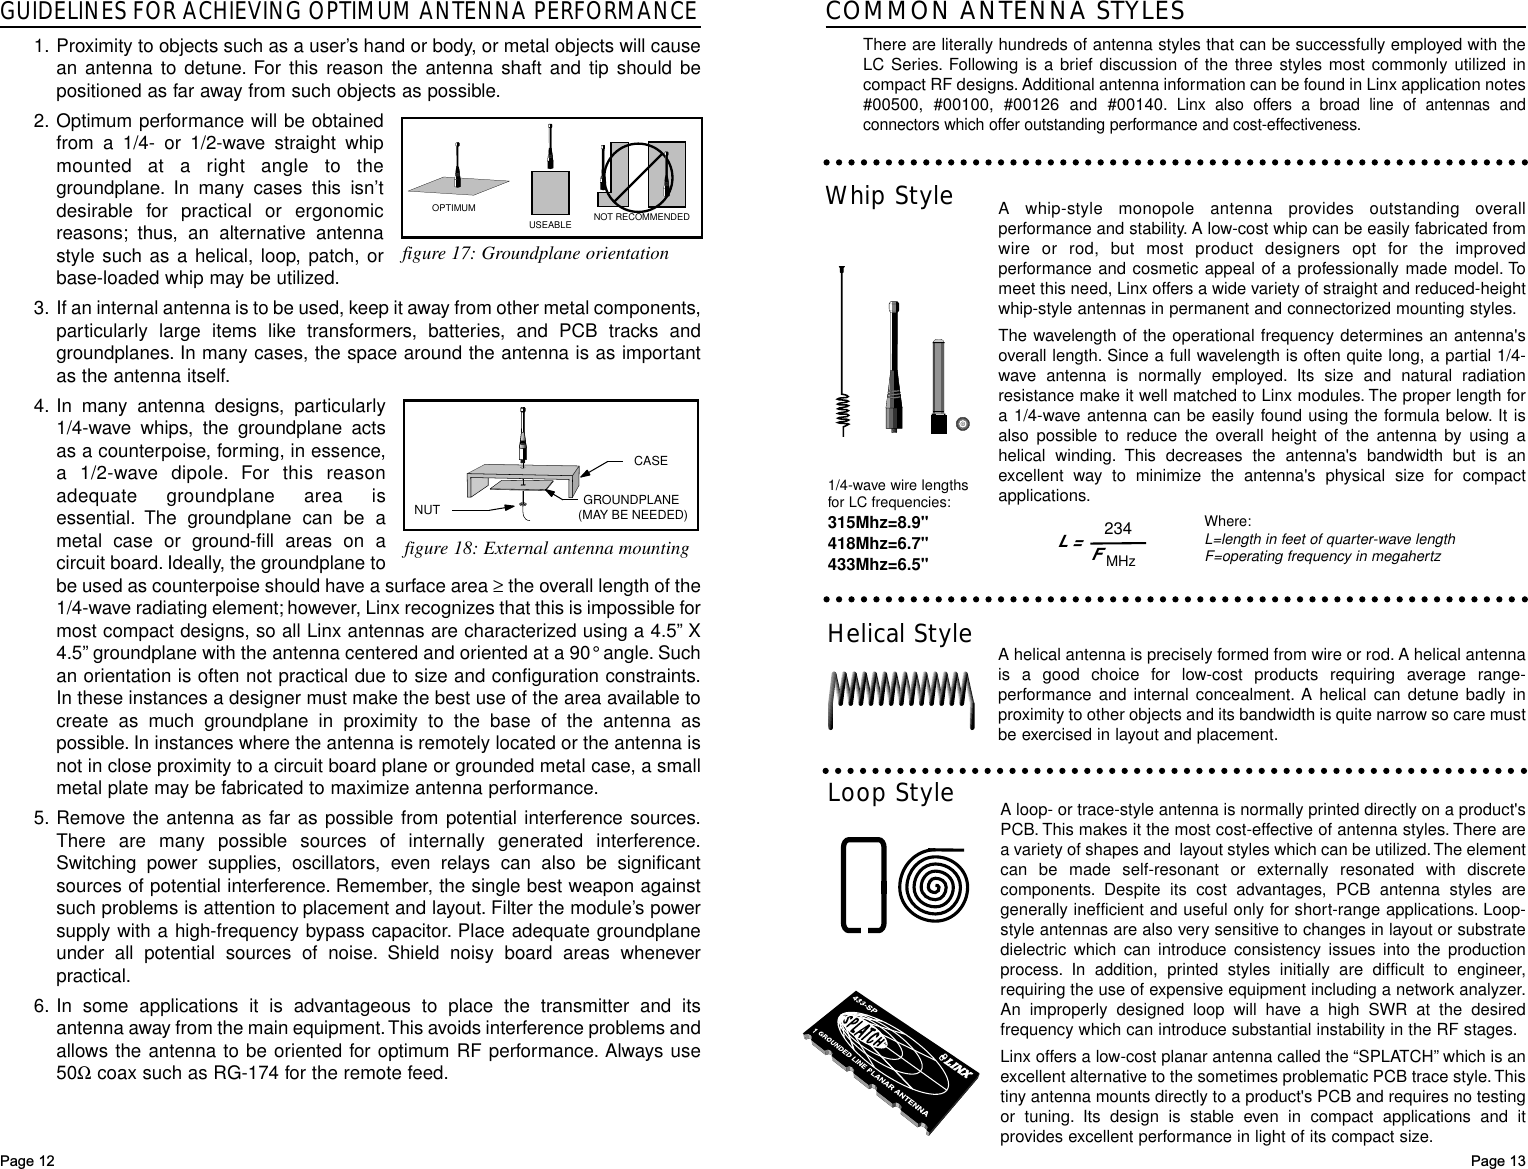 GUIDELINES FOR ACHIEVING OPTIMUM ANTENNA PERFORMANCE1. Proximity to objects such as a user’s hand or body, or metal objects will causean antenna to detune. For this reason the antenna shaft and tip should bepositioned as far away from such objects as possible.2. Optimum performance will be obtainedfrom a 1/4- or 1/2-wave straight whipmounted at a right angle to thegroundplane. In many cases this isn’tdesirable for practical or ergonomicreasons; thus, an alternative antennastyle such as a helical, loop, patch, orbase-loaded whip may be utilized.3. If an internal antenna is to be used, keep it away from other metal components,particularly large items like transformers, batteries, and PCB tracks andgroundplanes. In many cases, the space around the antenna is as importantas the antenna itself.4. In many antenna designs, particularly1/4-wave whips, the groundplane actsas a counterpoise, forming, in essence,a 1/2-wave dipole. For this reasonadequate groundplane area isessential. The groundplane can be ametal case or ground-fill areas on acircuit board. Ideally, the groundplane tobe used as counterpoise should have a surface area ≥the overall length of the1/4-wave radiating element; however, Linx recognizes that this is impossible formost compact designs, so all Linx antennas are characterized using a 4.5”X4.5”groundplane with the antenna centered and oriented at a 90°angle. Suchan orientation is often not practical due to size and configuration constraints.In these instances a designer must make the best use of the area available tocreate as much groundplane in proximity to the base of the antenna aspossible. In instances where the antenna is remotely located or the antenna isnot in close proximity to a circuit board plane or grounded metal case, a smallmetal plate may be fabricated to maximize antenna performance.5. Remove the antenna as far as possible from potential interference sources.There are many possible sources of internally generated interference.Switching power supplies, oscillators, even relays can also be significantsources of potential interference. Remember, the single best weapon againstsuch problems is attention to placement and layout. Filter the module’s powersupply with a high-frequency bypass capacitor. Place adequate groundplaneunder all potential sources of noise. Shield noisy board areas wheneverpractical.6. In some applications it is advantageous to place the transmitter and itsantenna away from the main equipment.This avoids interference problems andallows the antenna to be oriented for optimum RF performance. Always use50Ωcoax such as RG-174 for the remote feed.Page 13Helical StyleWhip StyleLoop Style1/4-wave wire lengthsfor LC frequencies:315Mhz=8.9&quot;418Mhz=6.7&quot;433Mhz=6.5&quot;Where:L=length in feet of quarter-wave length F=operating frequency in megahertzCOMMON ANTENNA STYLESThere are literally hundreds of antenna styles that can be successfully employed with theLC Series. Following is a brief discussion of the three styles most commonly utilized incompact RF designs. Additional antenna information can be found in Linx application notes#00500, #00100, #00126 and #00140.Linx also offers a broad line of antennas andconnectors which offer outstanding performance and cost-effectiveness.A whip-style monopole antenna provides outstanding overallperformance and stability. A low-cost whip can be easily fabricated fromwire or rod, but most product designers opt for the improvedperformance and cosmetic appeal of a professionally made model. Tomeet this need, Linx offers a wide variety of straight and reduced-heightwhip-style antennas in permanent and connectorized mounting styles.The wavelength of the operational frequency determines an antenna&apos;soverall length. Since a full wavelength is often quite long, a partial 1/4-wave antenna is normally employed. Its size and natural radiationresistance make it well matched to Linx modules. The proper length fora 1/4-wave antenna can be easily found using the formula below. It isalso possible to reduce the overall height of the antenna by using ahelical winding. This decreases the antenna&apos;s bandwidth but is anexcellent way to minimize the antenna&apos;s physical size for compactapplications.A helical antenna is precisely formed from wire or rod. A helical antennais a good choice for low-cost products requiring average range-performance and internal concealment. A helical can detune badly inproximity to other objects and its bandwidth is quite narrow so care mustbe exercised in layout and placement.A loop- or trace-style antenna is normally printed directly on a product&apos;sPCB. This makes it the most cost-effective of antenna styles. There area variety of shapes and  layout styles which can be utilized.The elementcan be made self-resonant or externally resonated with discretecomponents. Despite its cost advantages, PCB antenna styles aregenerally inefficient and useful only for short-range applications. Loop-style antennas are also very sensitive to changes in layout or substratedielectric which can introduce consistency issues into the productionprocess. In addition, printed styles initially are difficult to engineer,requiring the use of expensive equipment including a network analyzer.An improperly designed loop will have a high SWR at the desiredfrequency which can introduce substantial instability in the RF stages.Linx offers a low-cost planar antenna called the “SPLATCH”which is anexcellent alternative to the sometimes problematic PCB trace style.Thistiny antenna mounts directly to a product&apos;s PCB and requires no testingor tuning. Its design is stable even in compact applications and itprovides excellent performance in light of its compact size.L =234FMHzPage 12NUT GROUNDPLANE (MAY BE NEEDED)CASEOPTIMUMUSEABLE NOT RECOMMENDEDfigure 17: Groundplane orientationfigure 18: External antenna mounting